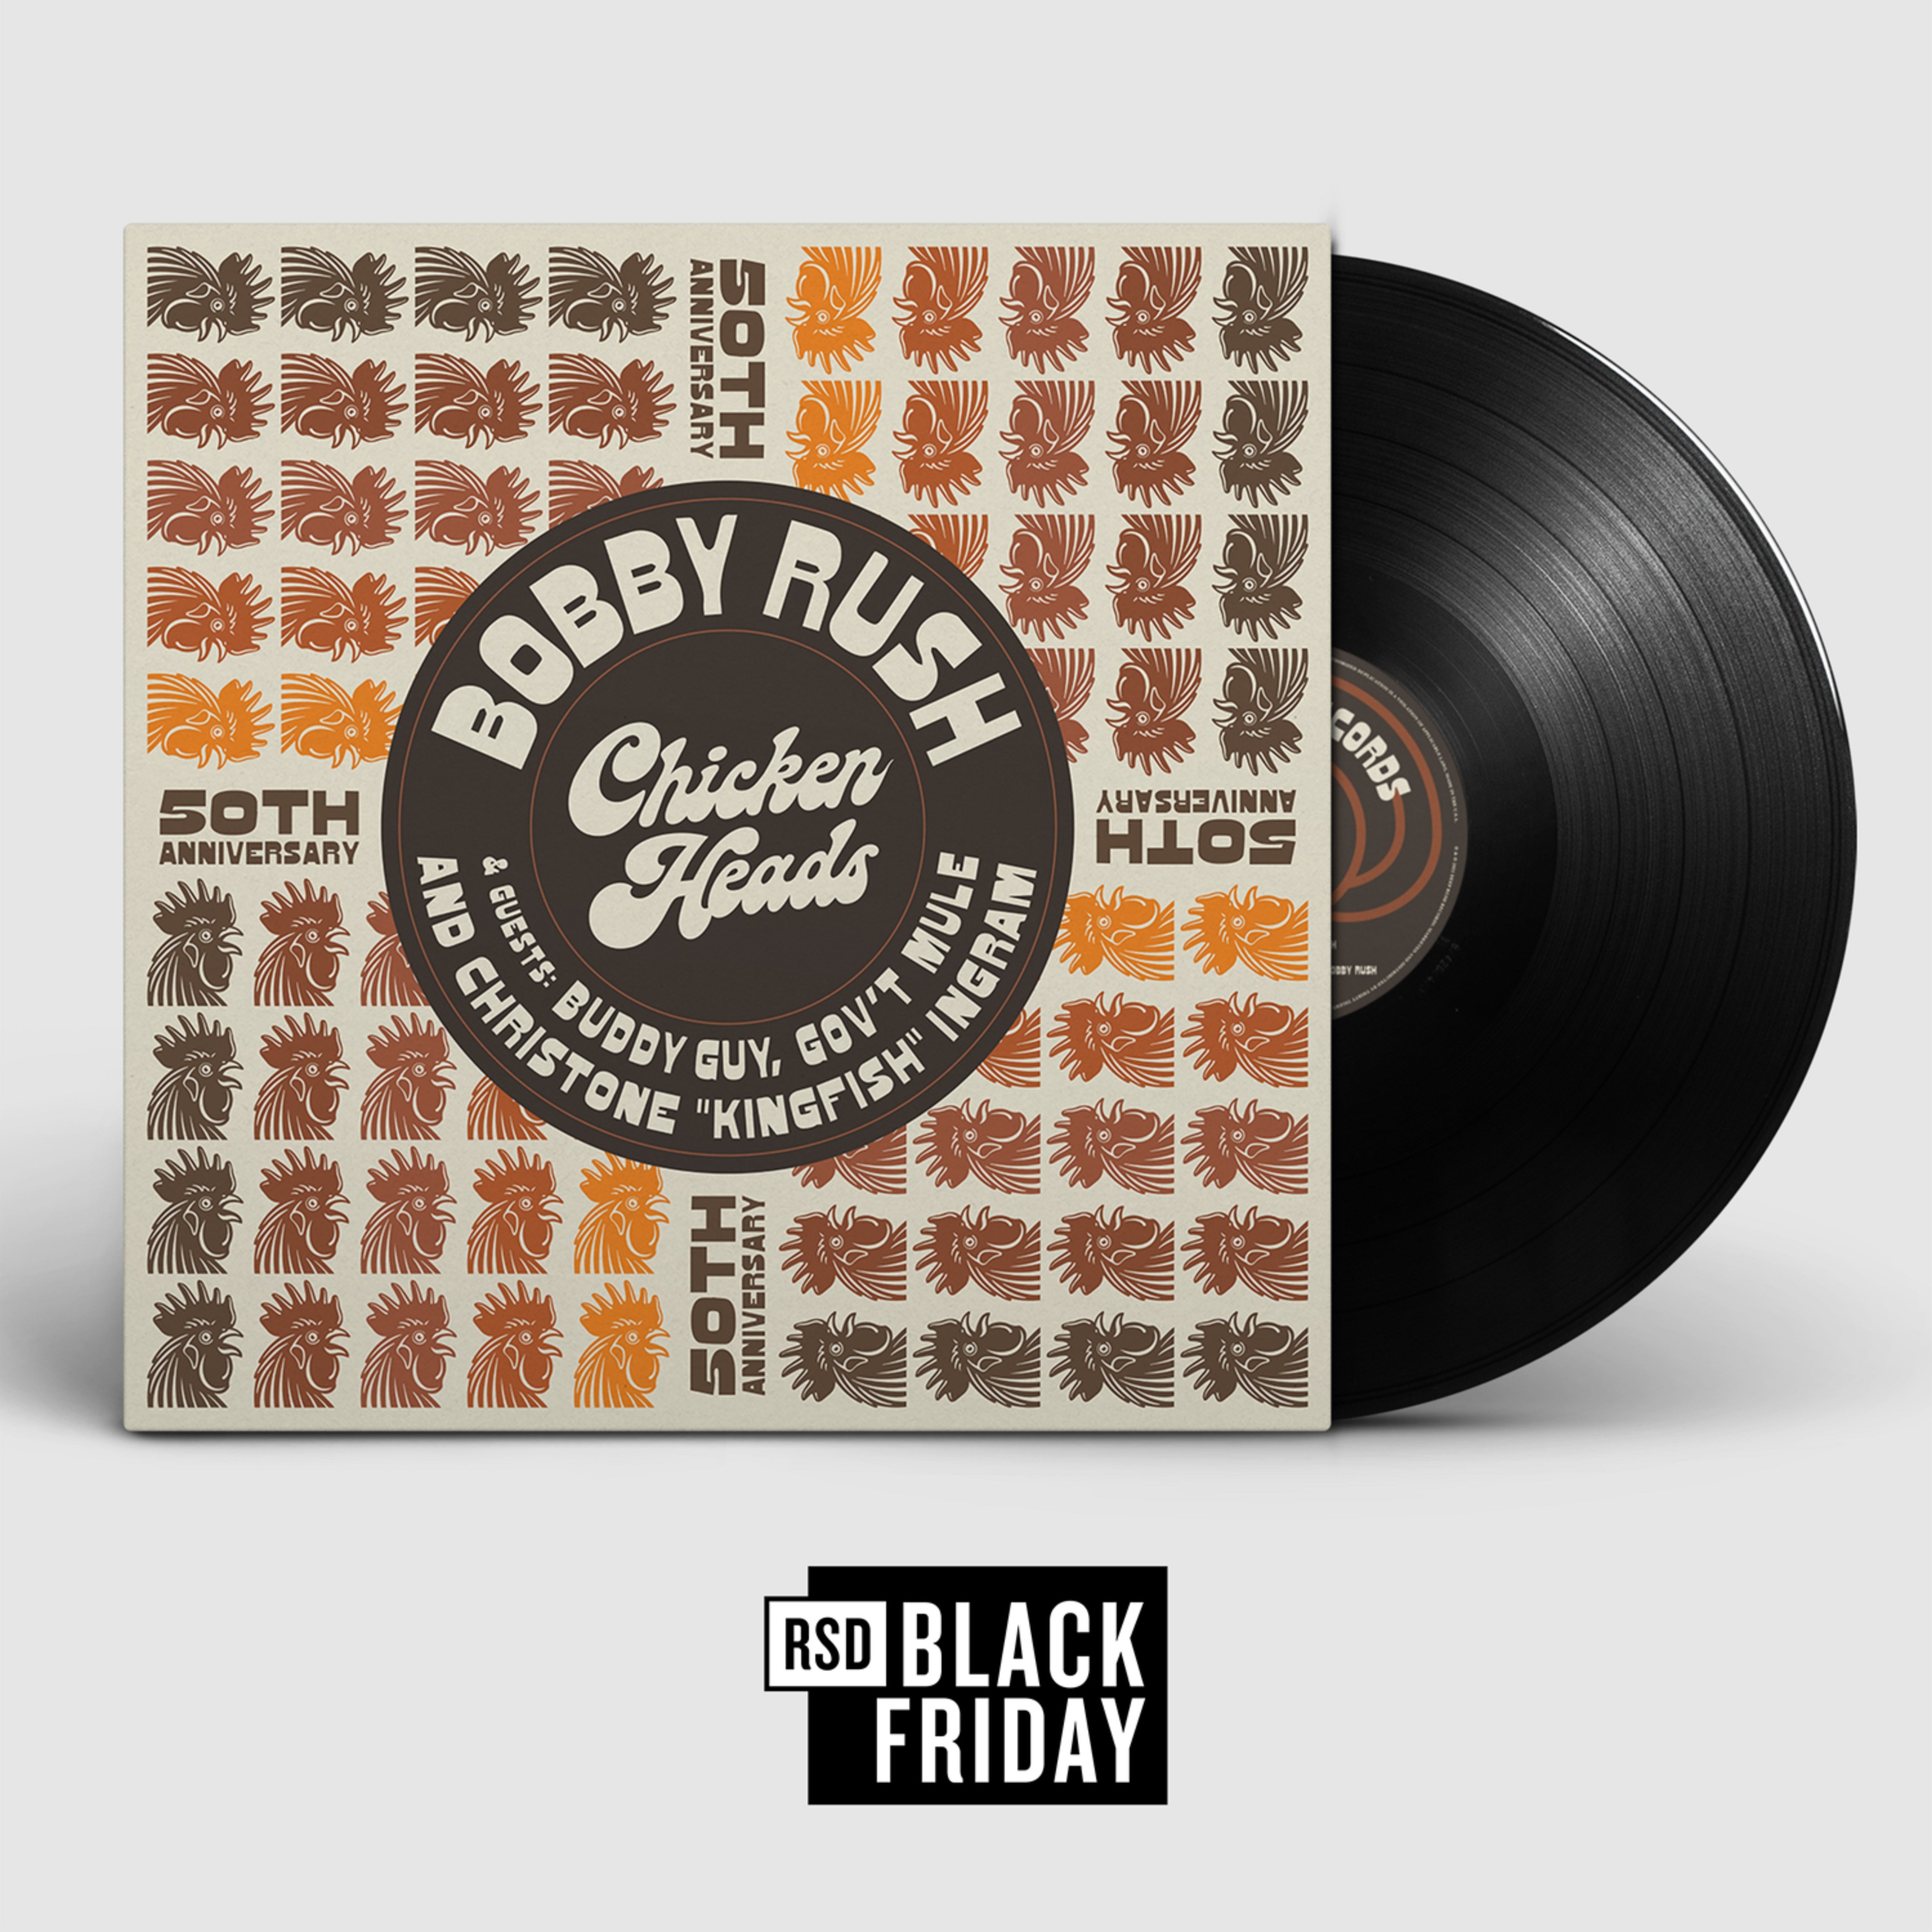 Bobby Rush celebrates 50 years of "Chicken heads" with vinyl Black Friday exclusive